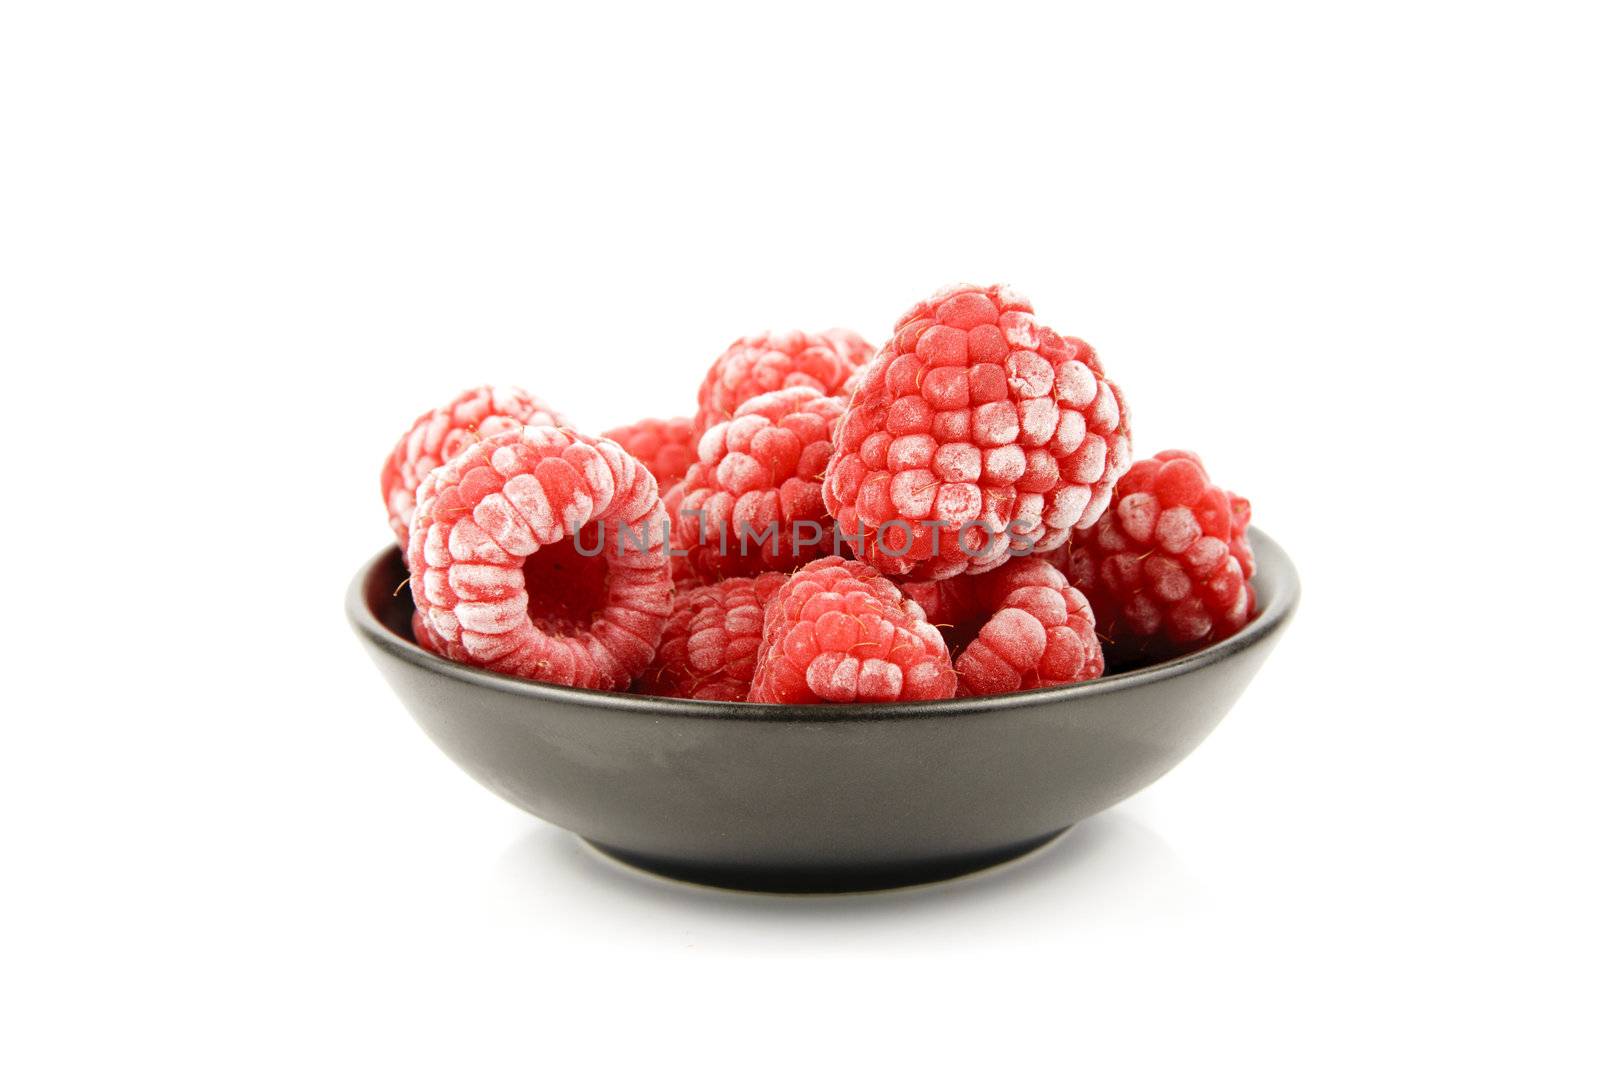 Red ripe frozen raspberries in a small black bowl on a reflective white background